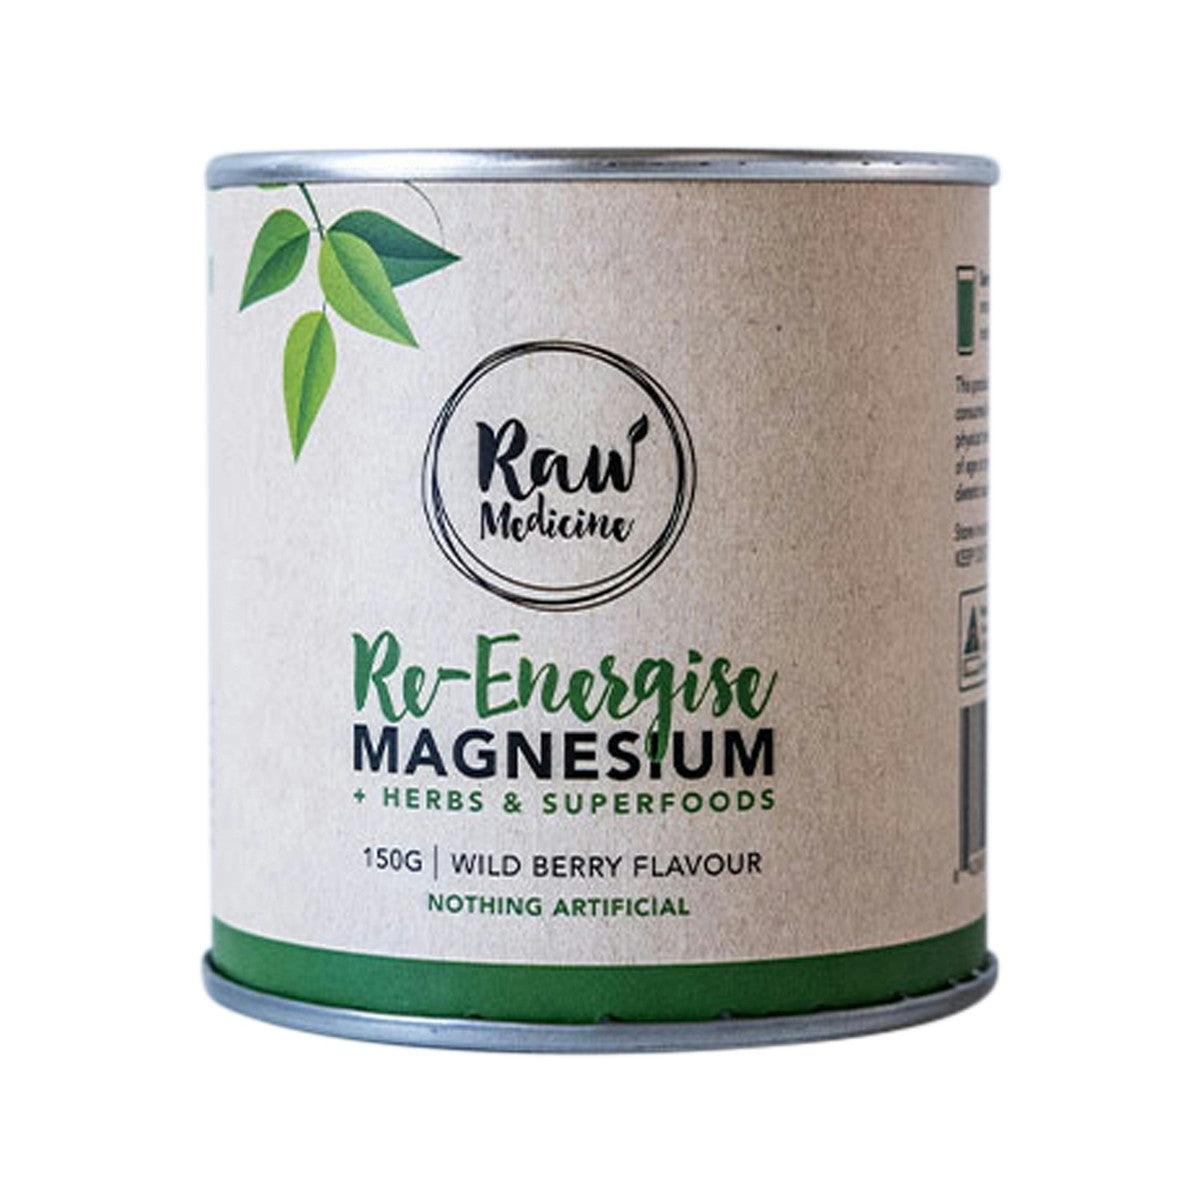 image of Raw Medicine Re-Energise Magnesium + Herbs & Superfoods (Wild Berry Flavour) 150g on white background